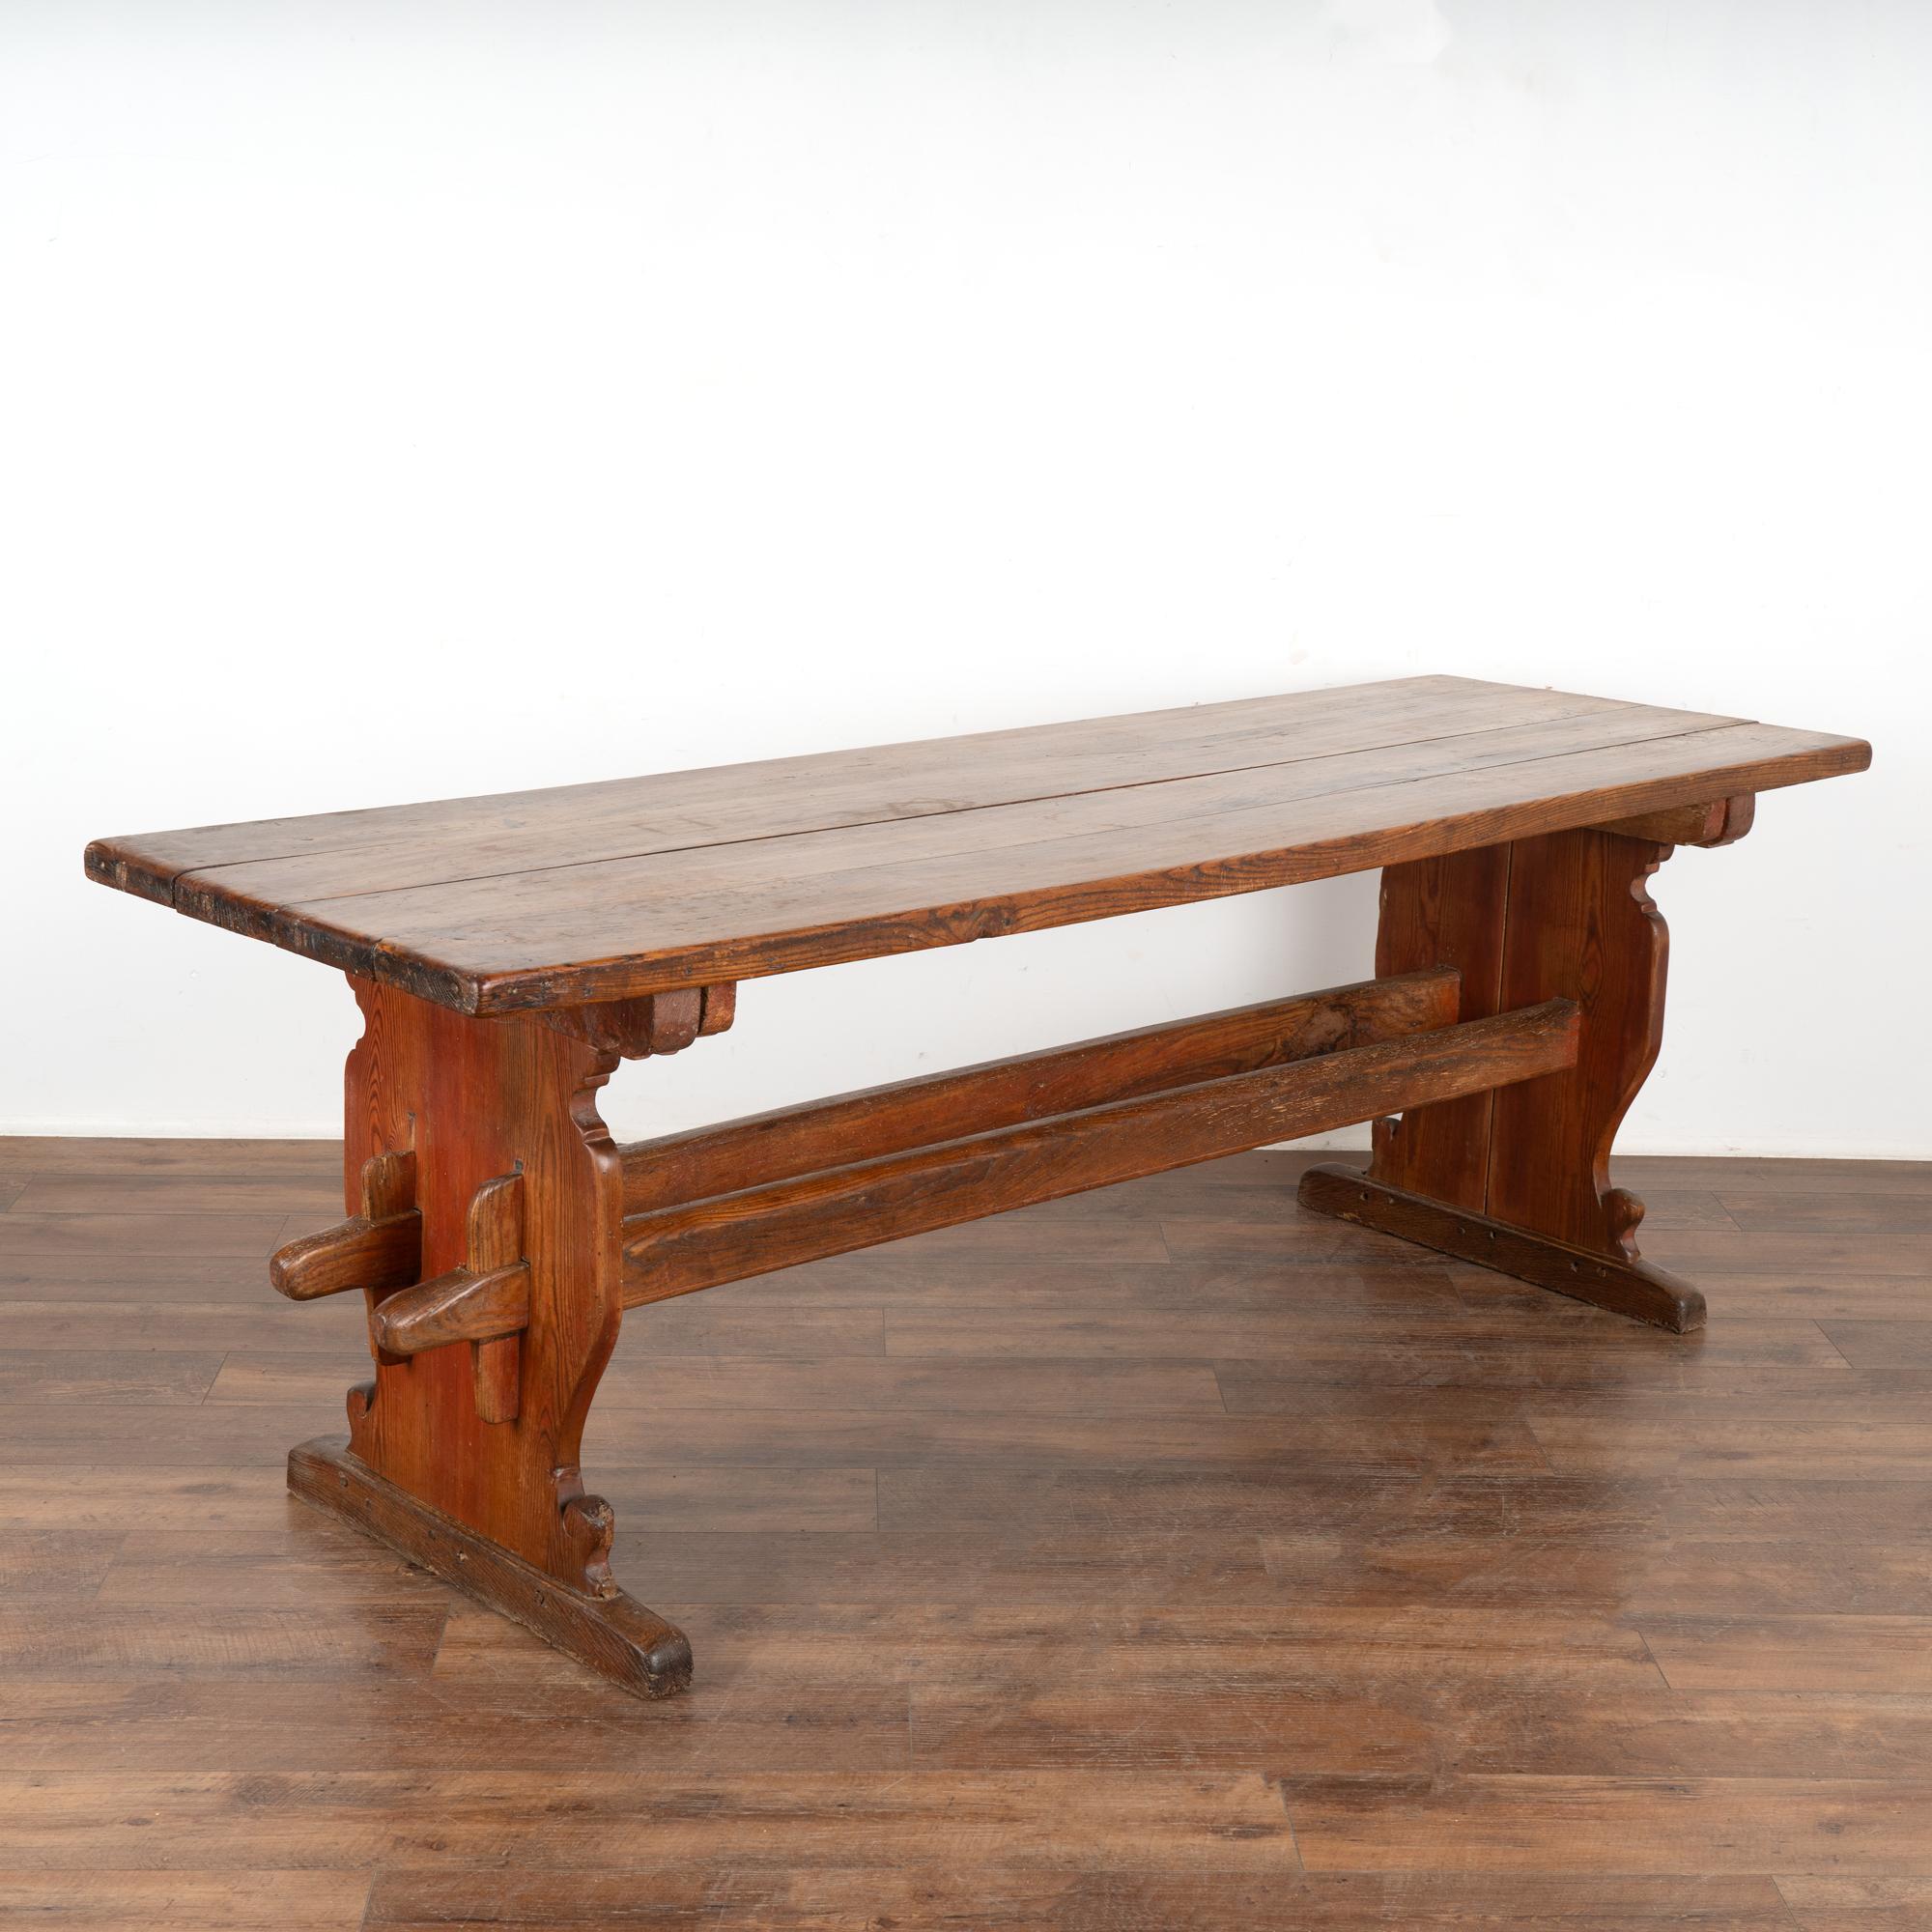 This old farm table is loaded with aged patina and warmth that come from generations of use.  
As seen in photos, the rich brown has touches of red around the side legs/stretchers. 
Restored, strong and stable, this 7' table is ready to be used and